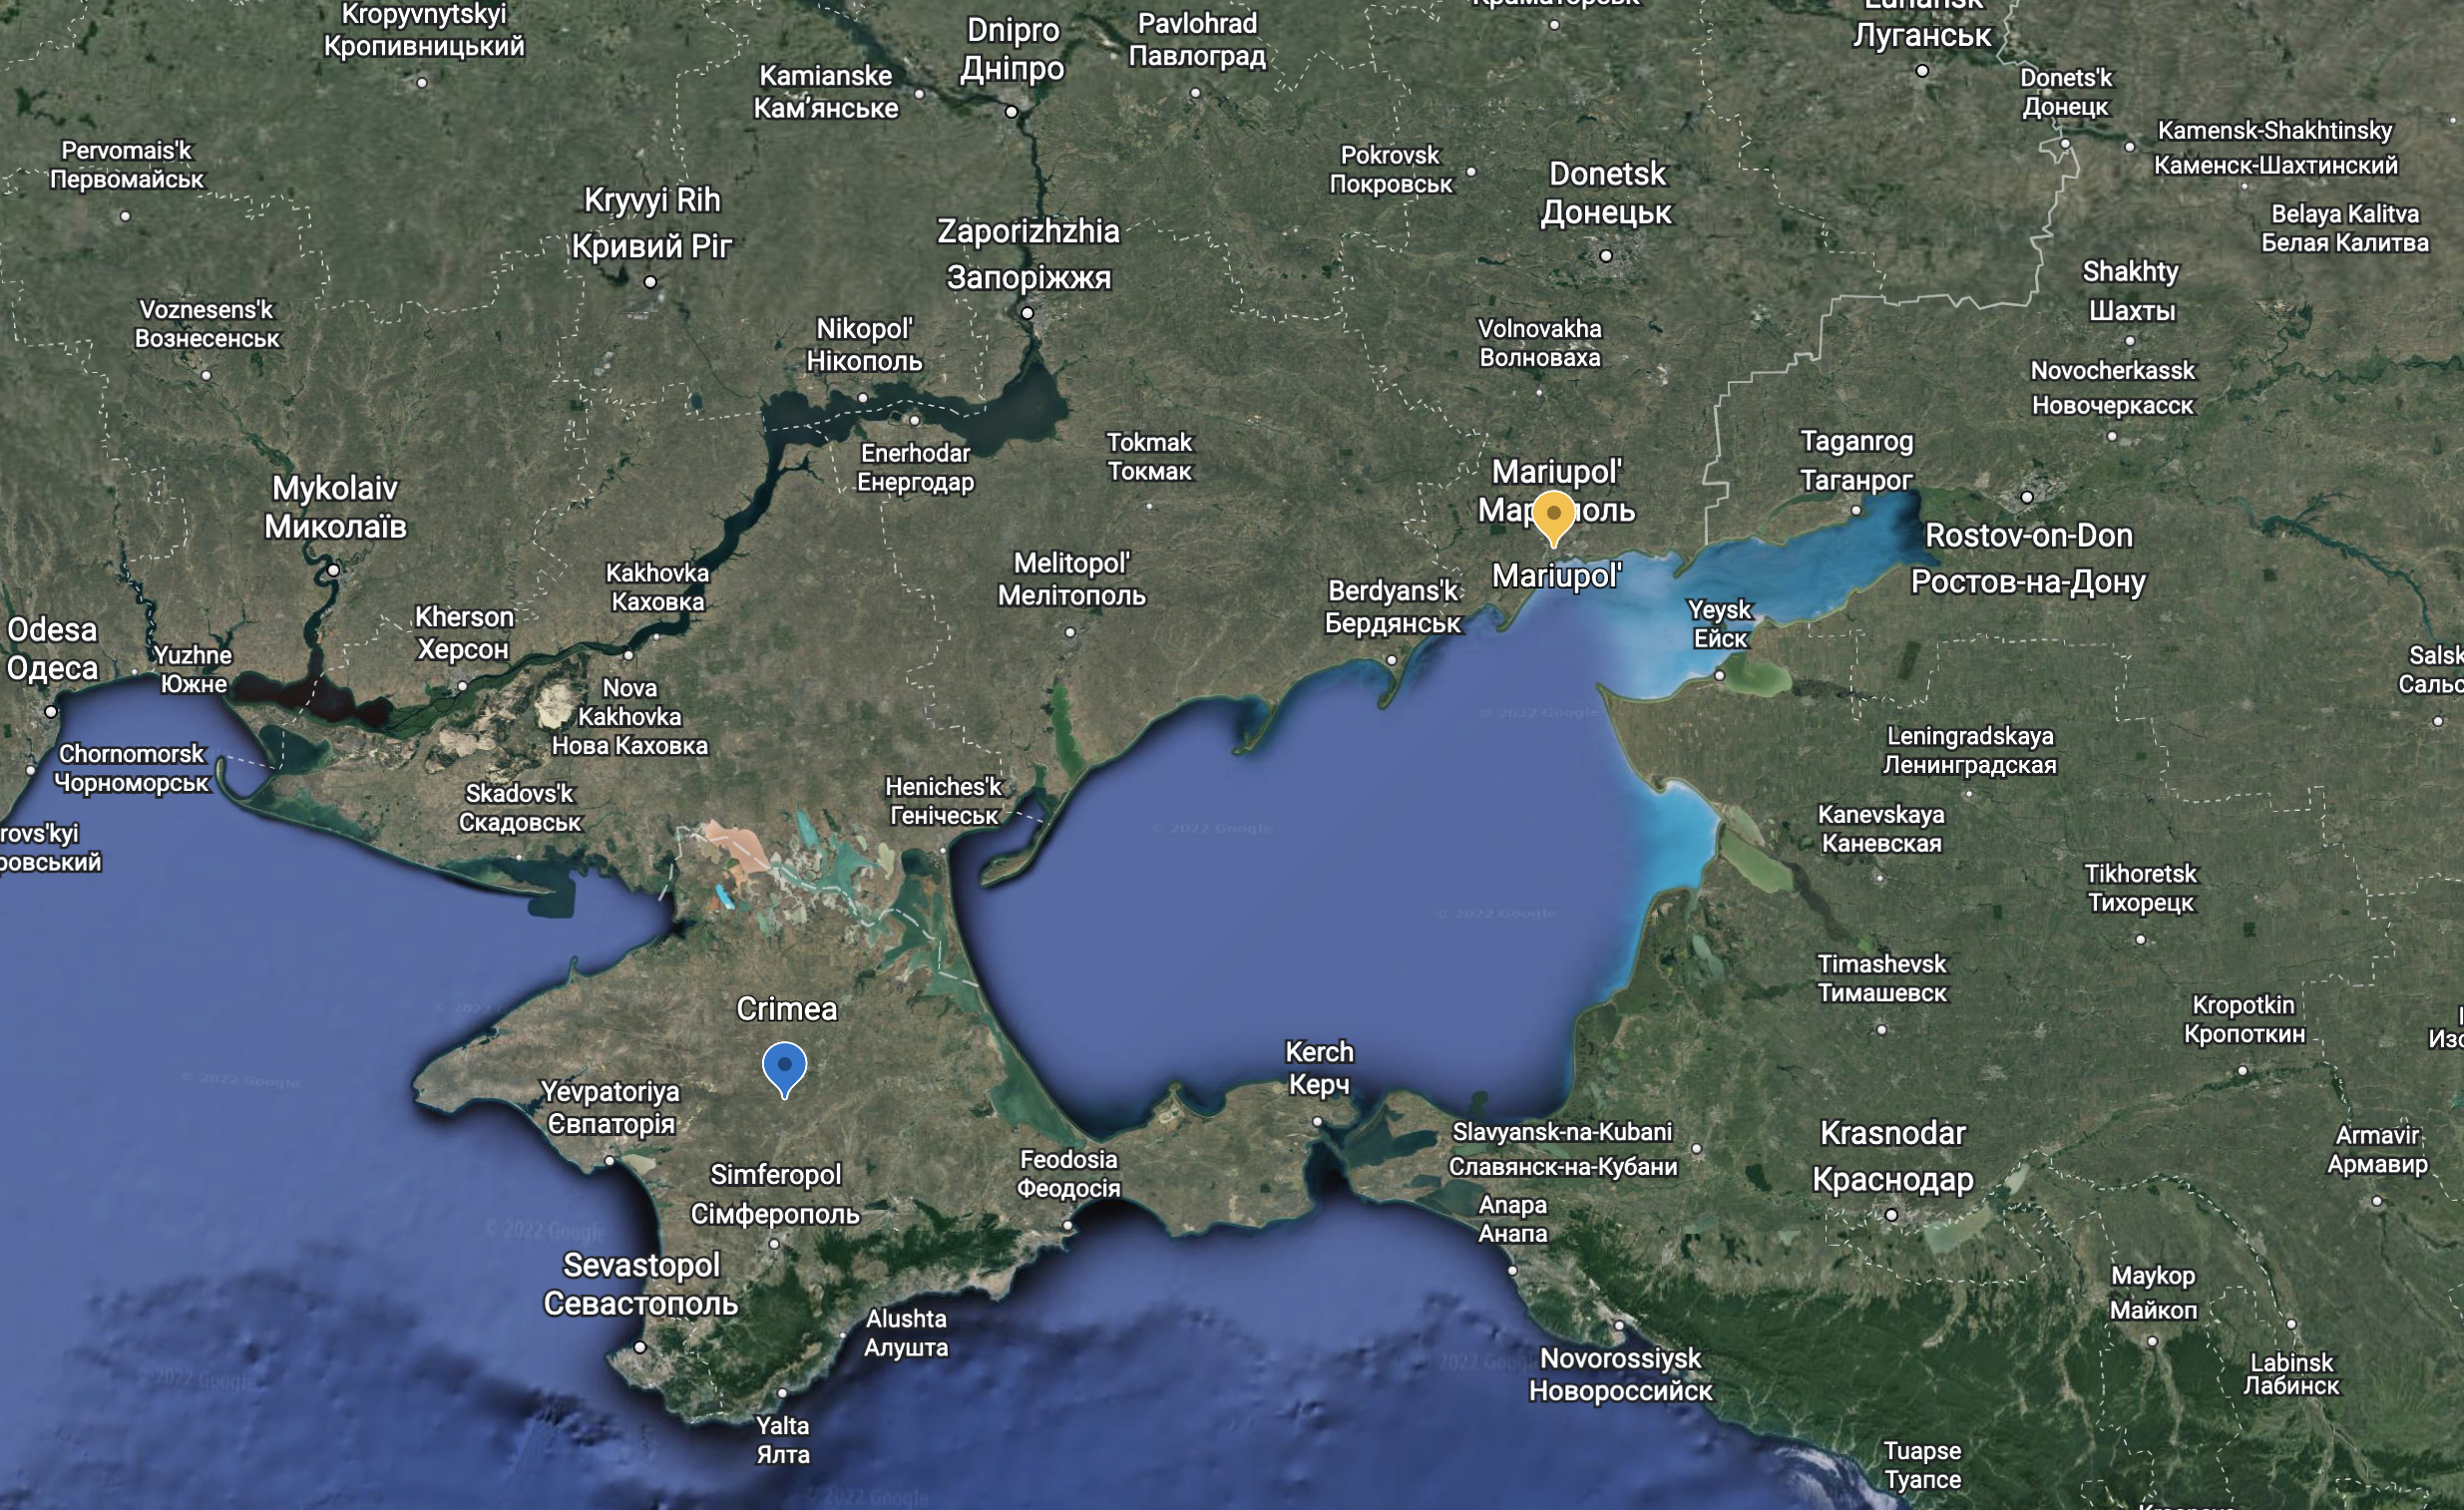 A map showing Crimea and Mariupol in the Donetsk Oblast region of Ukraine.